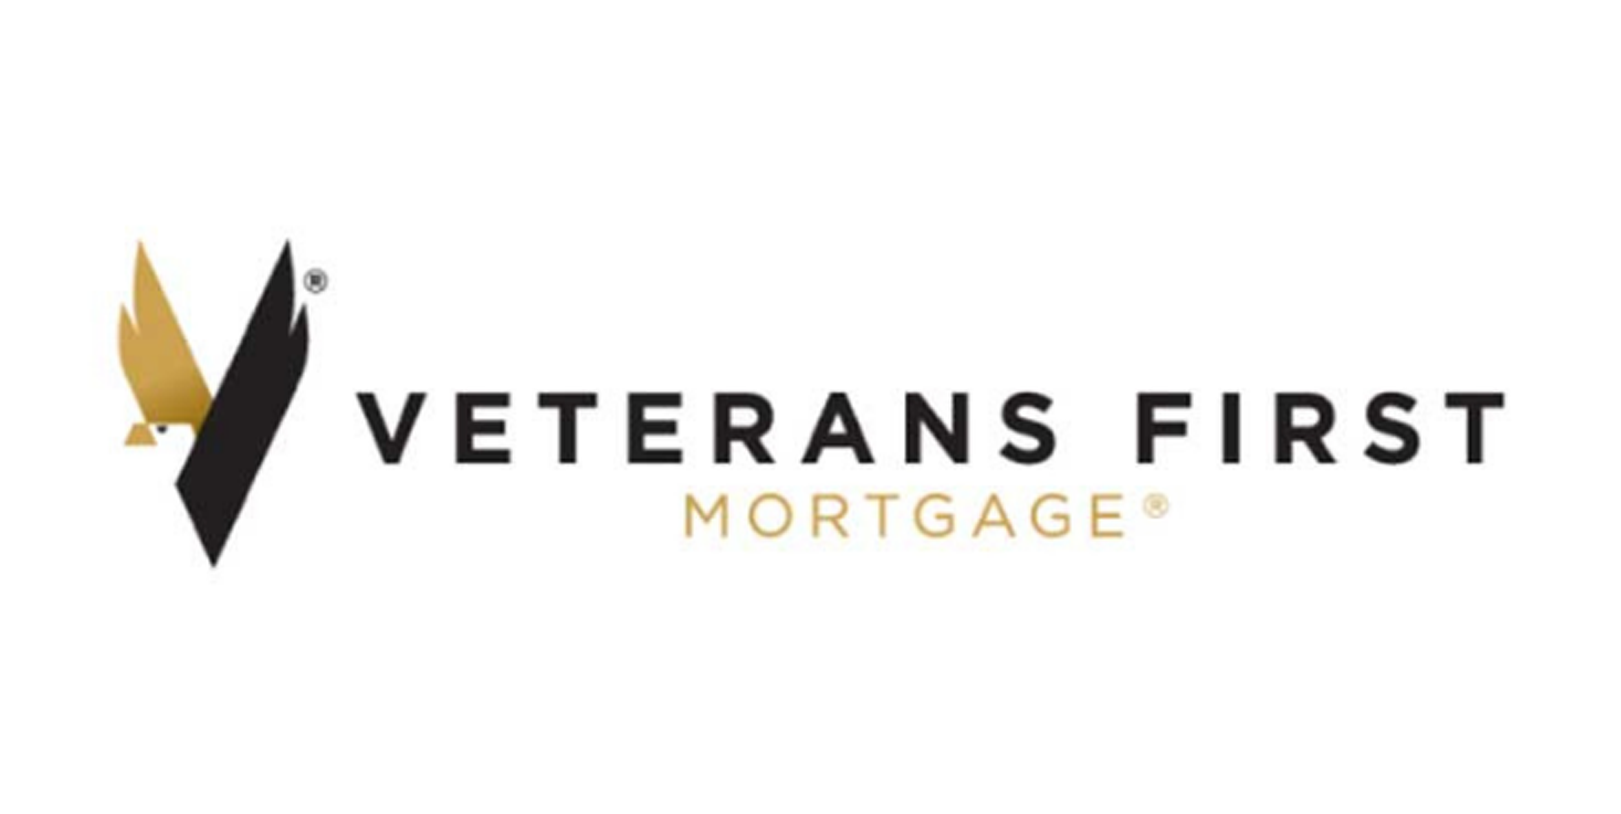 The Malinois Foundation - Trusted Utah Women Survivors Veterans First Mortgage